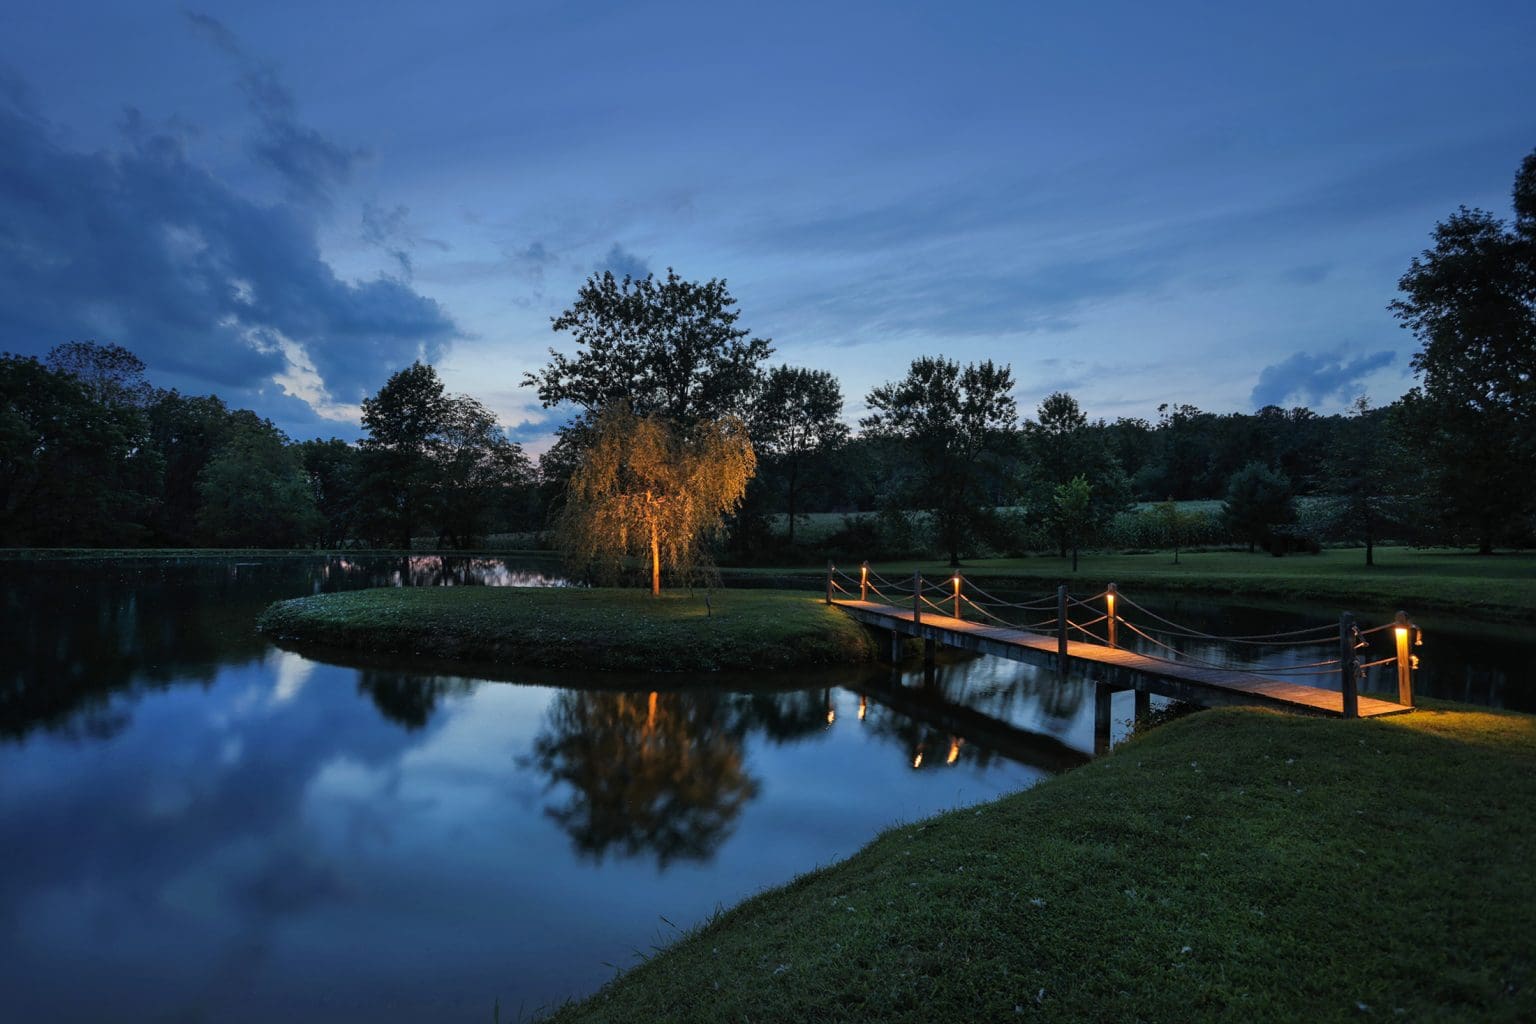 A serene landscape design featuring a wooden bridge over a peaceful pond during the enchanting hours of dusk.